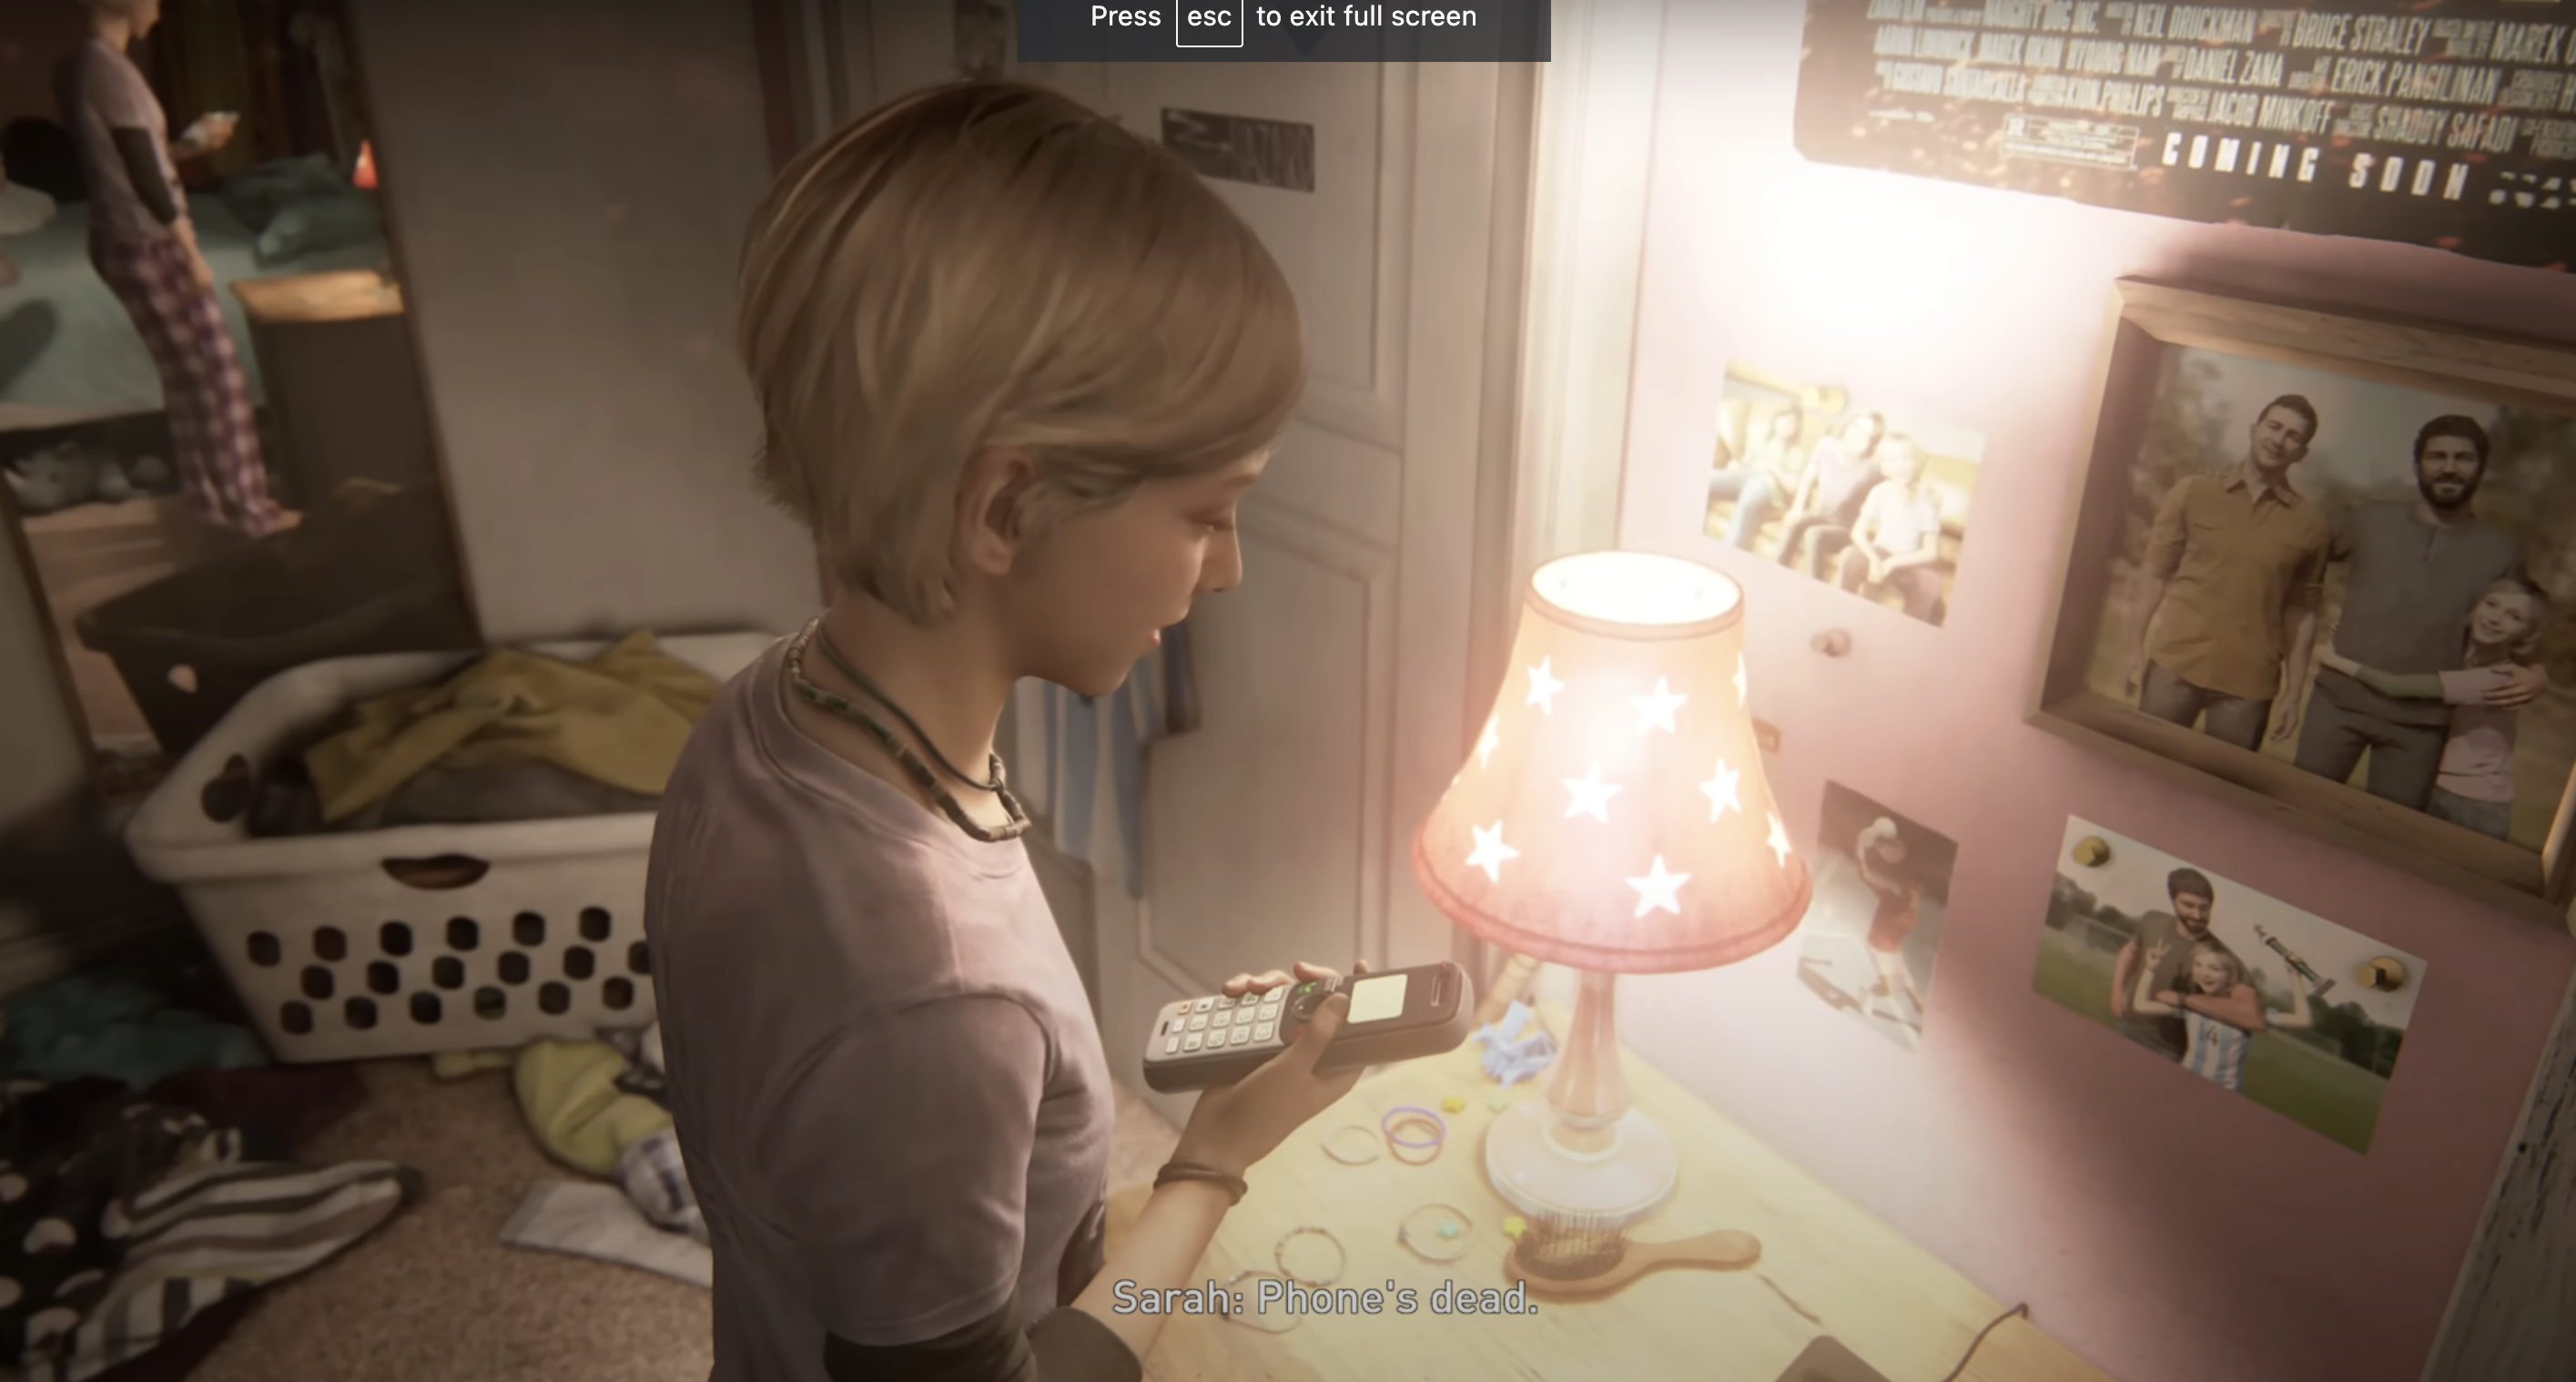 Sarah in her bedroom in the game